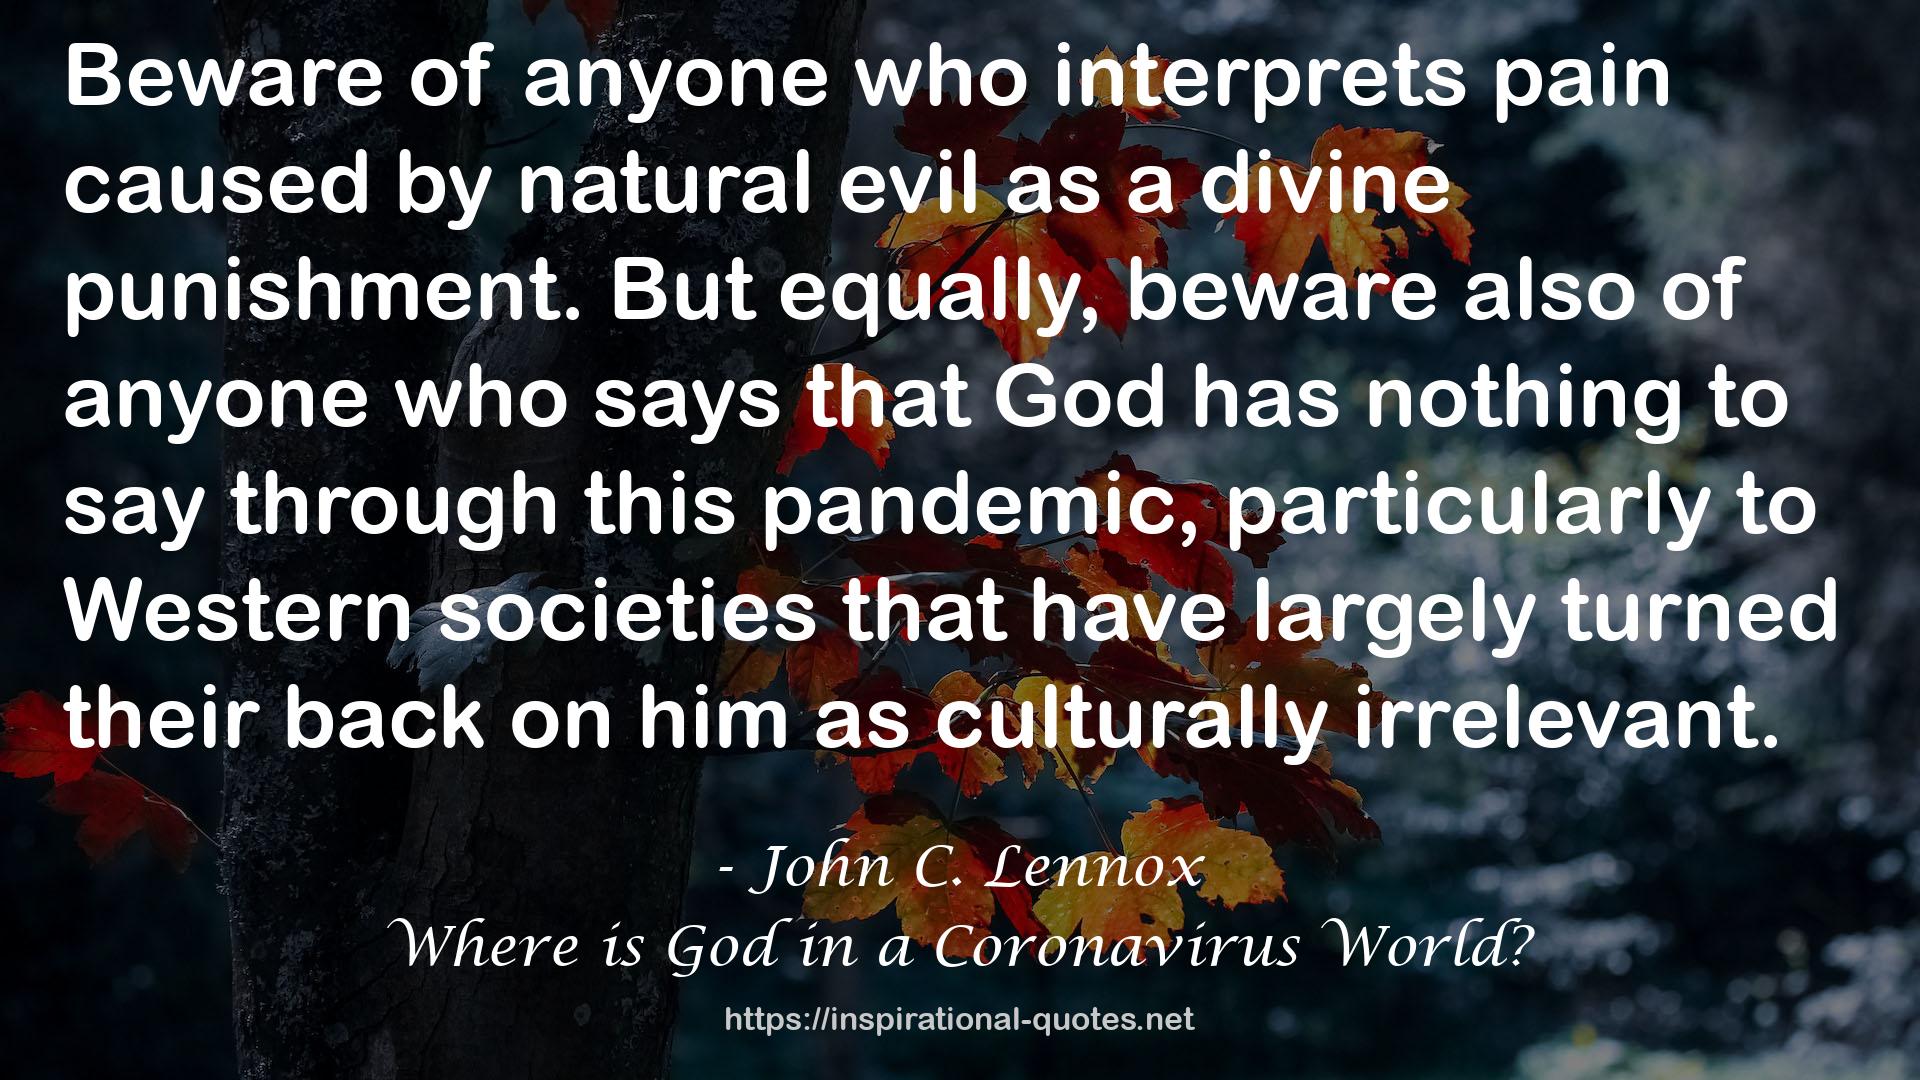 Where is God in a Coronavirus World? QUOTES